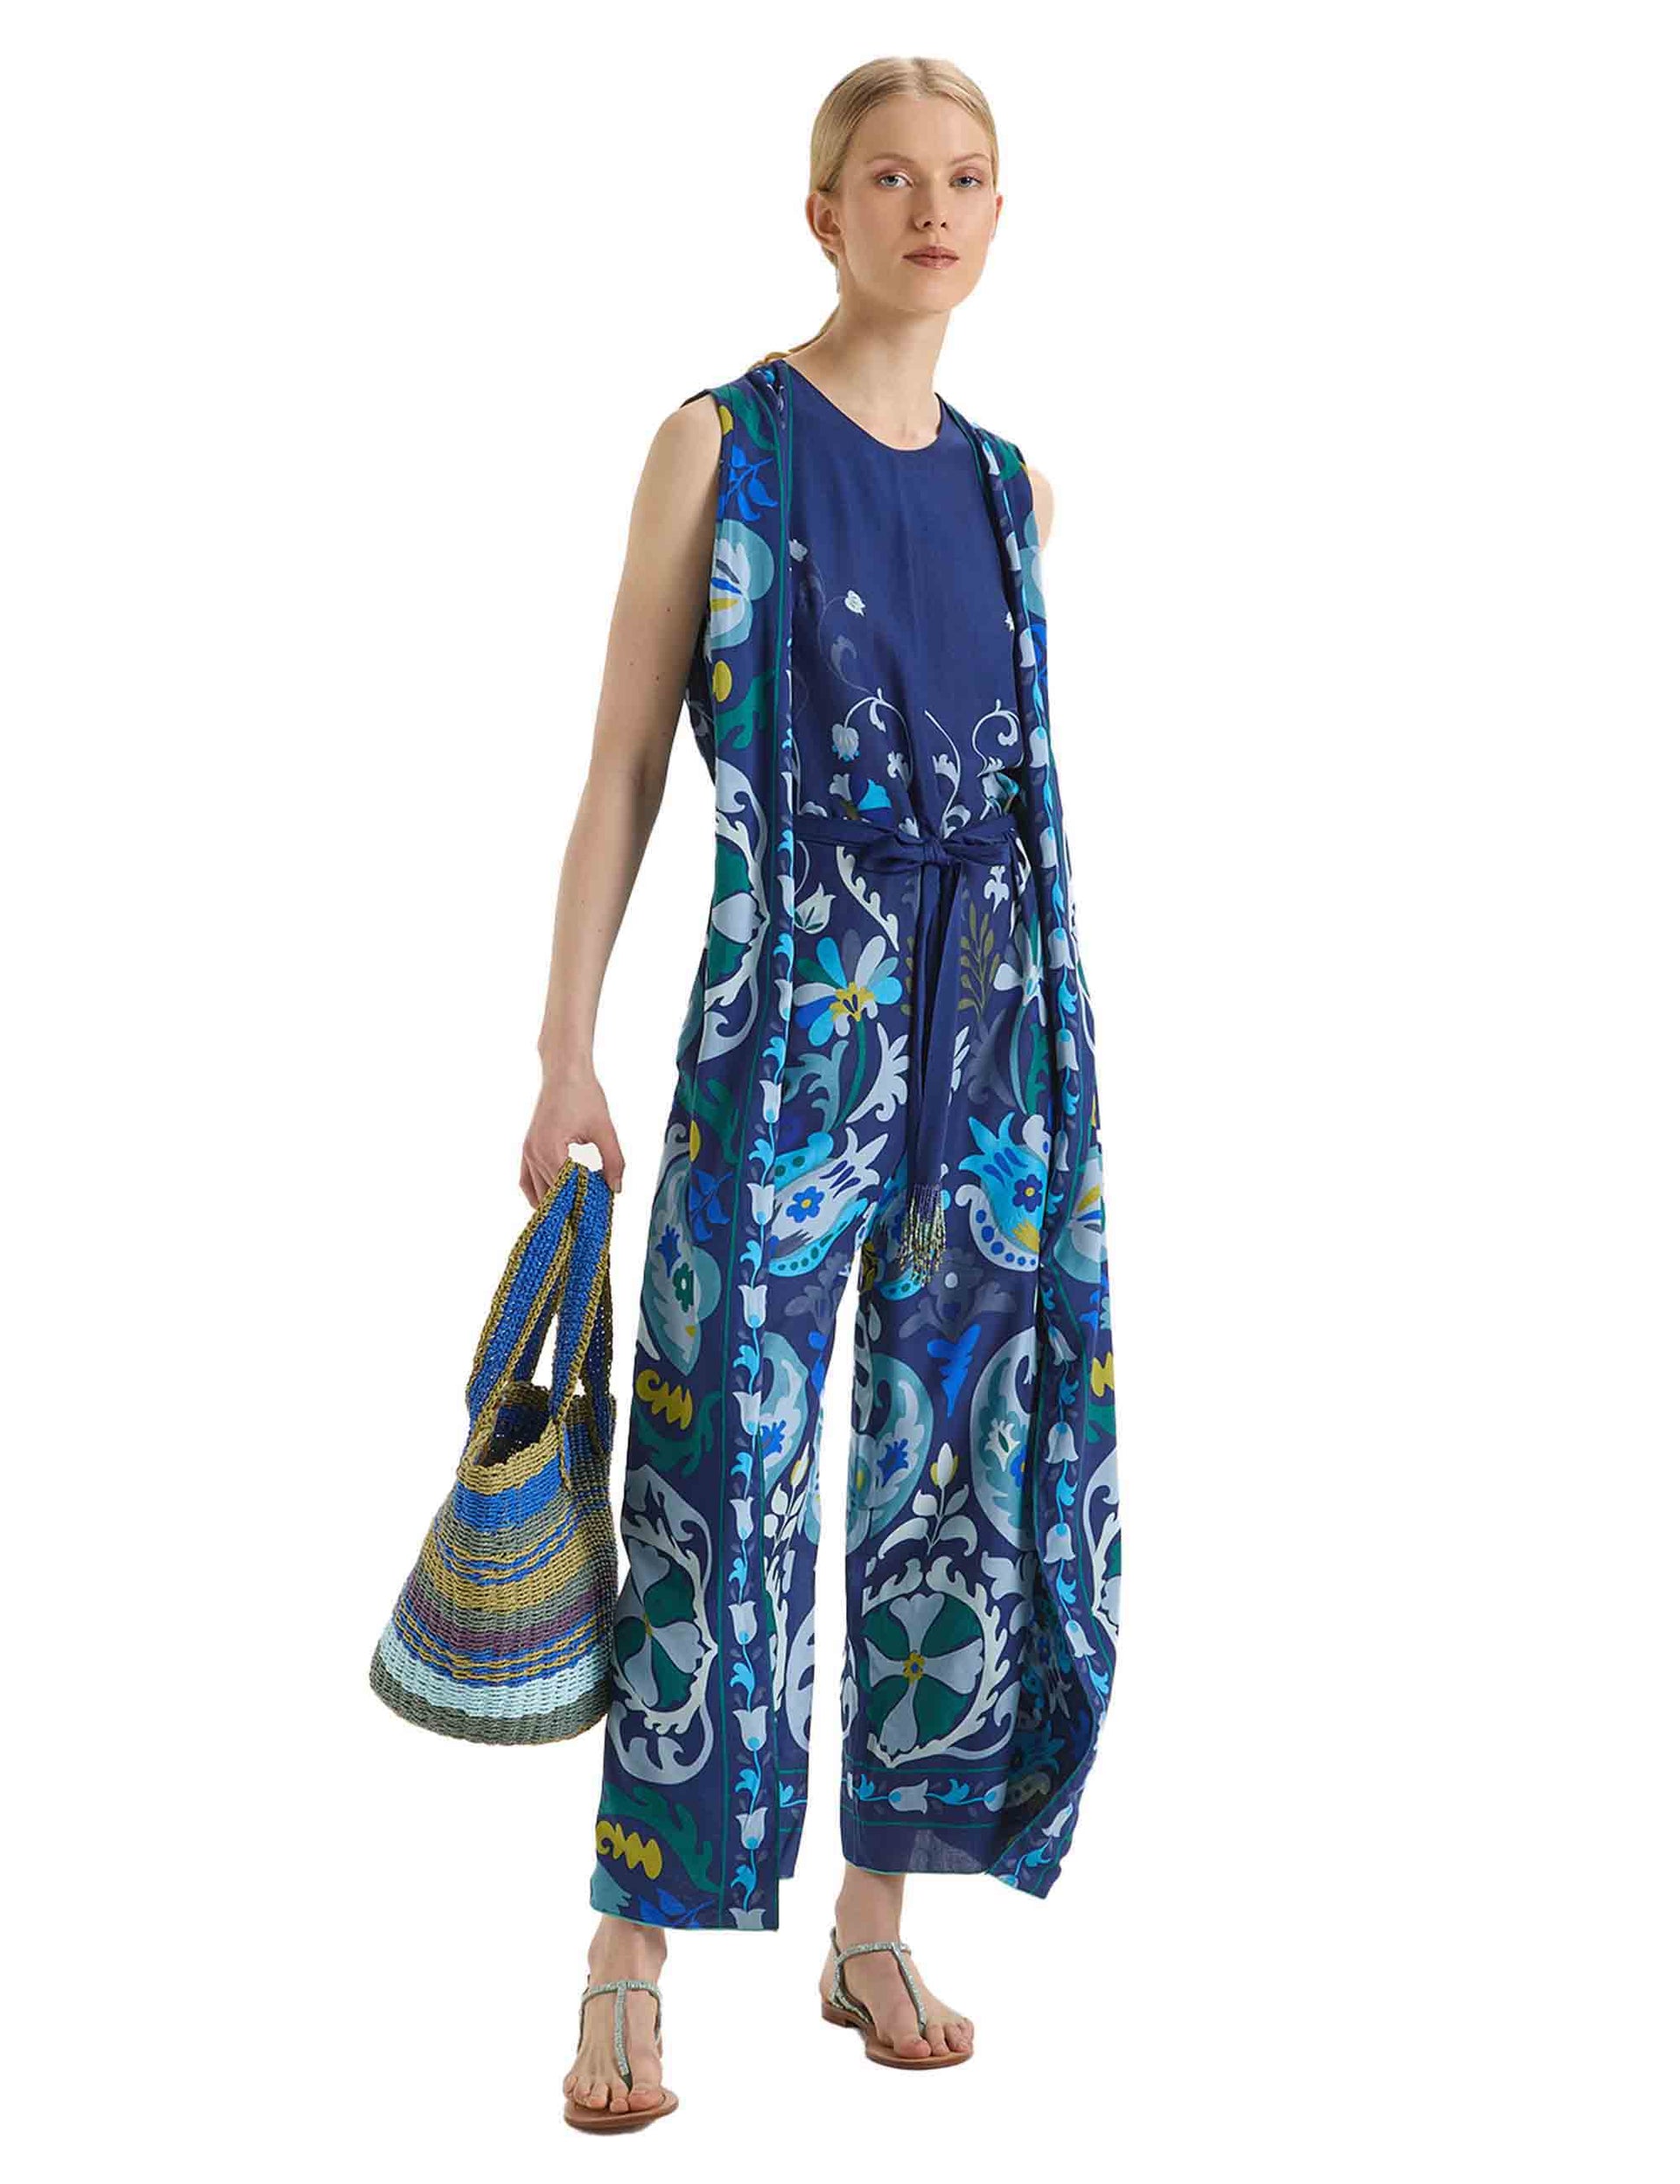 Fortuna Print women's dresses in blue and light blue canvas with beads